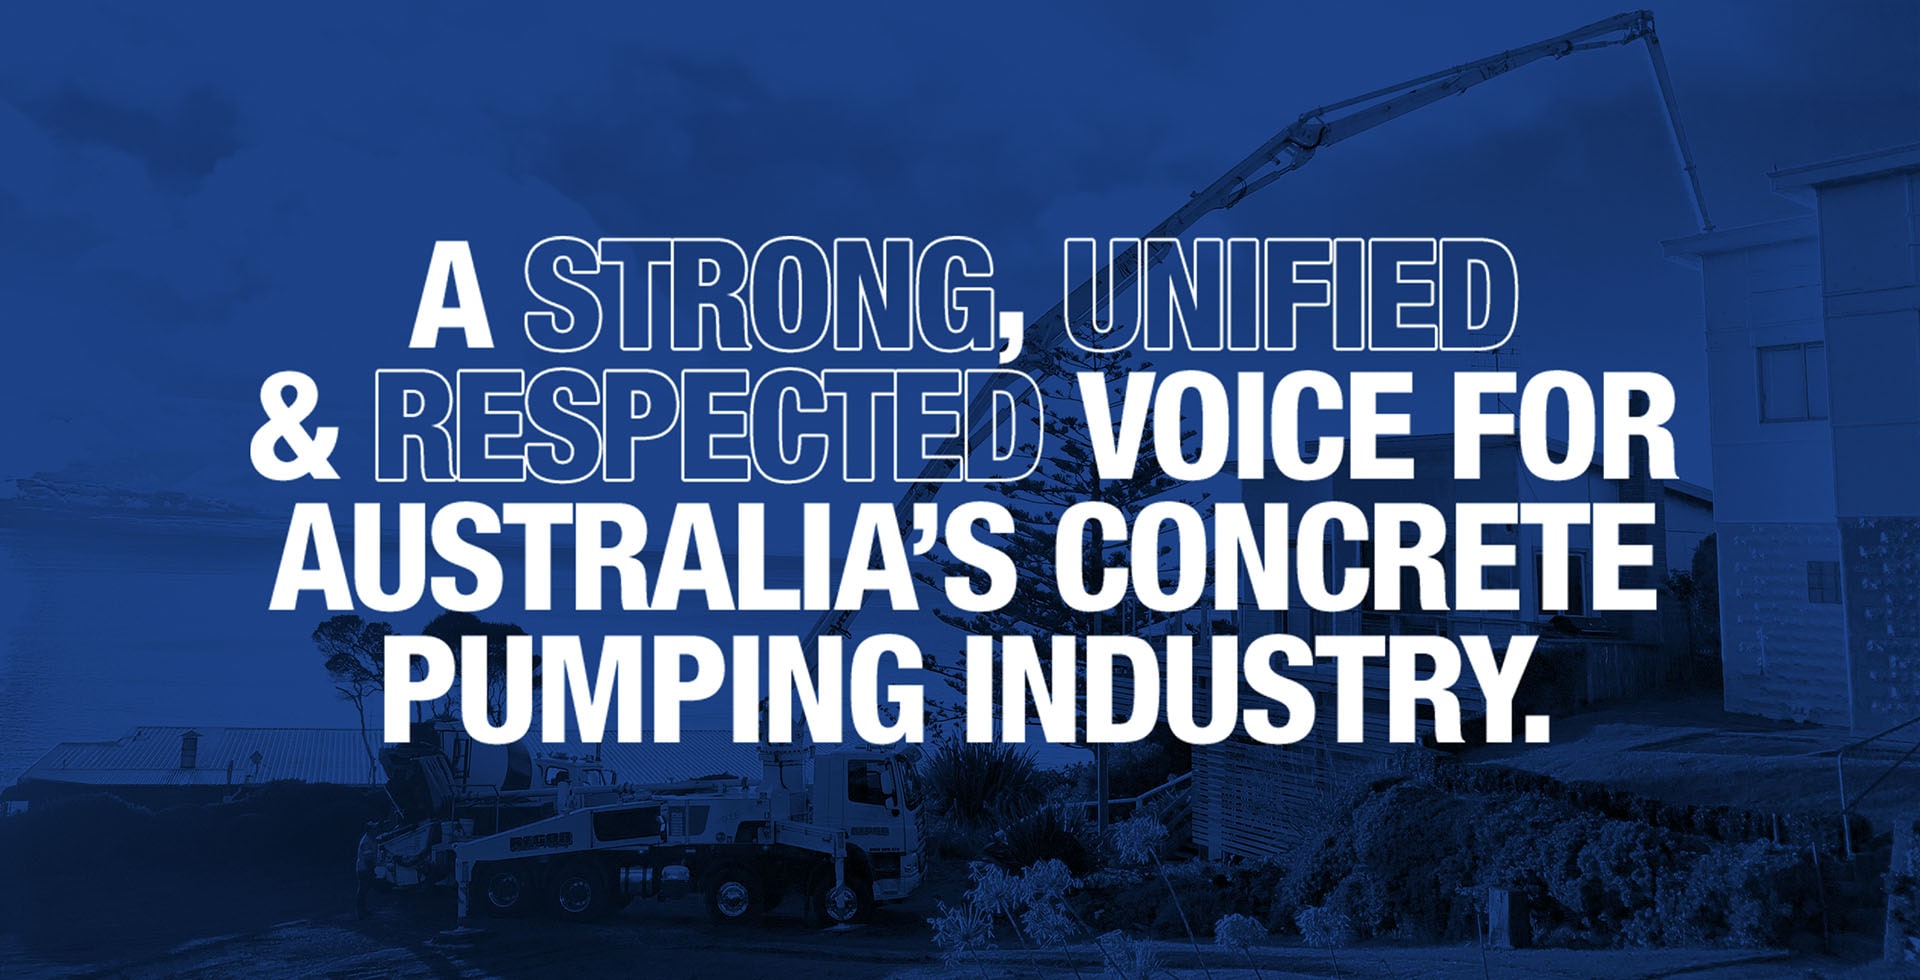 A Strong, Unified & Respected Voice for Australia's Concrete Pumping Industry